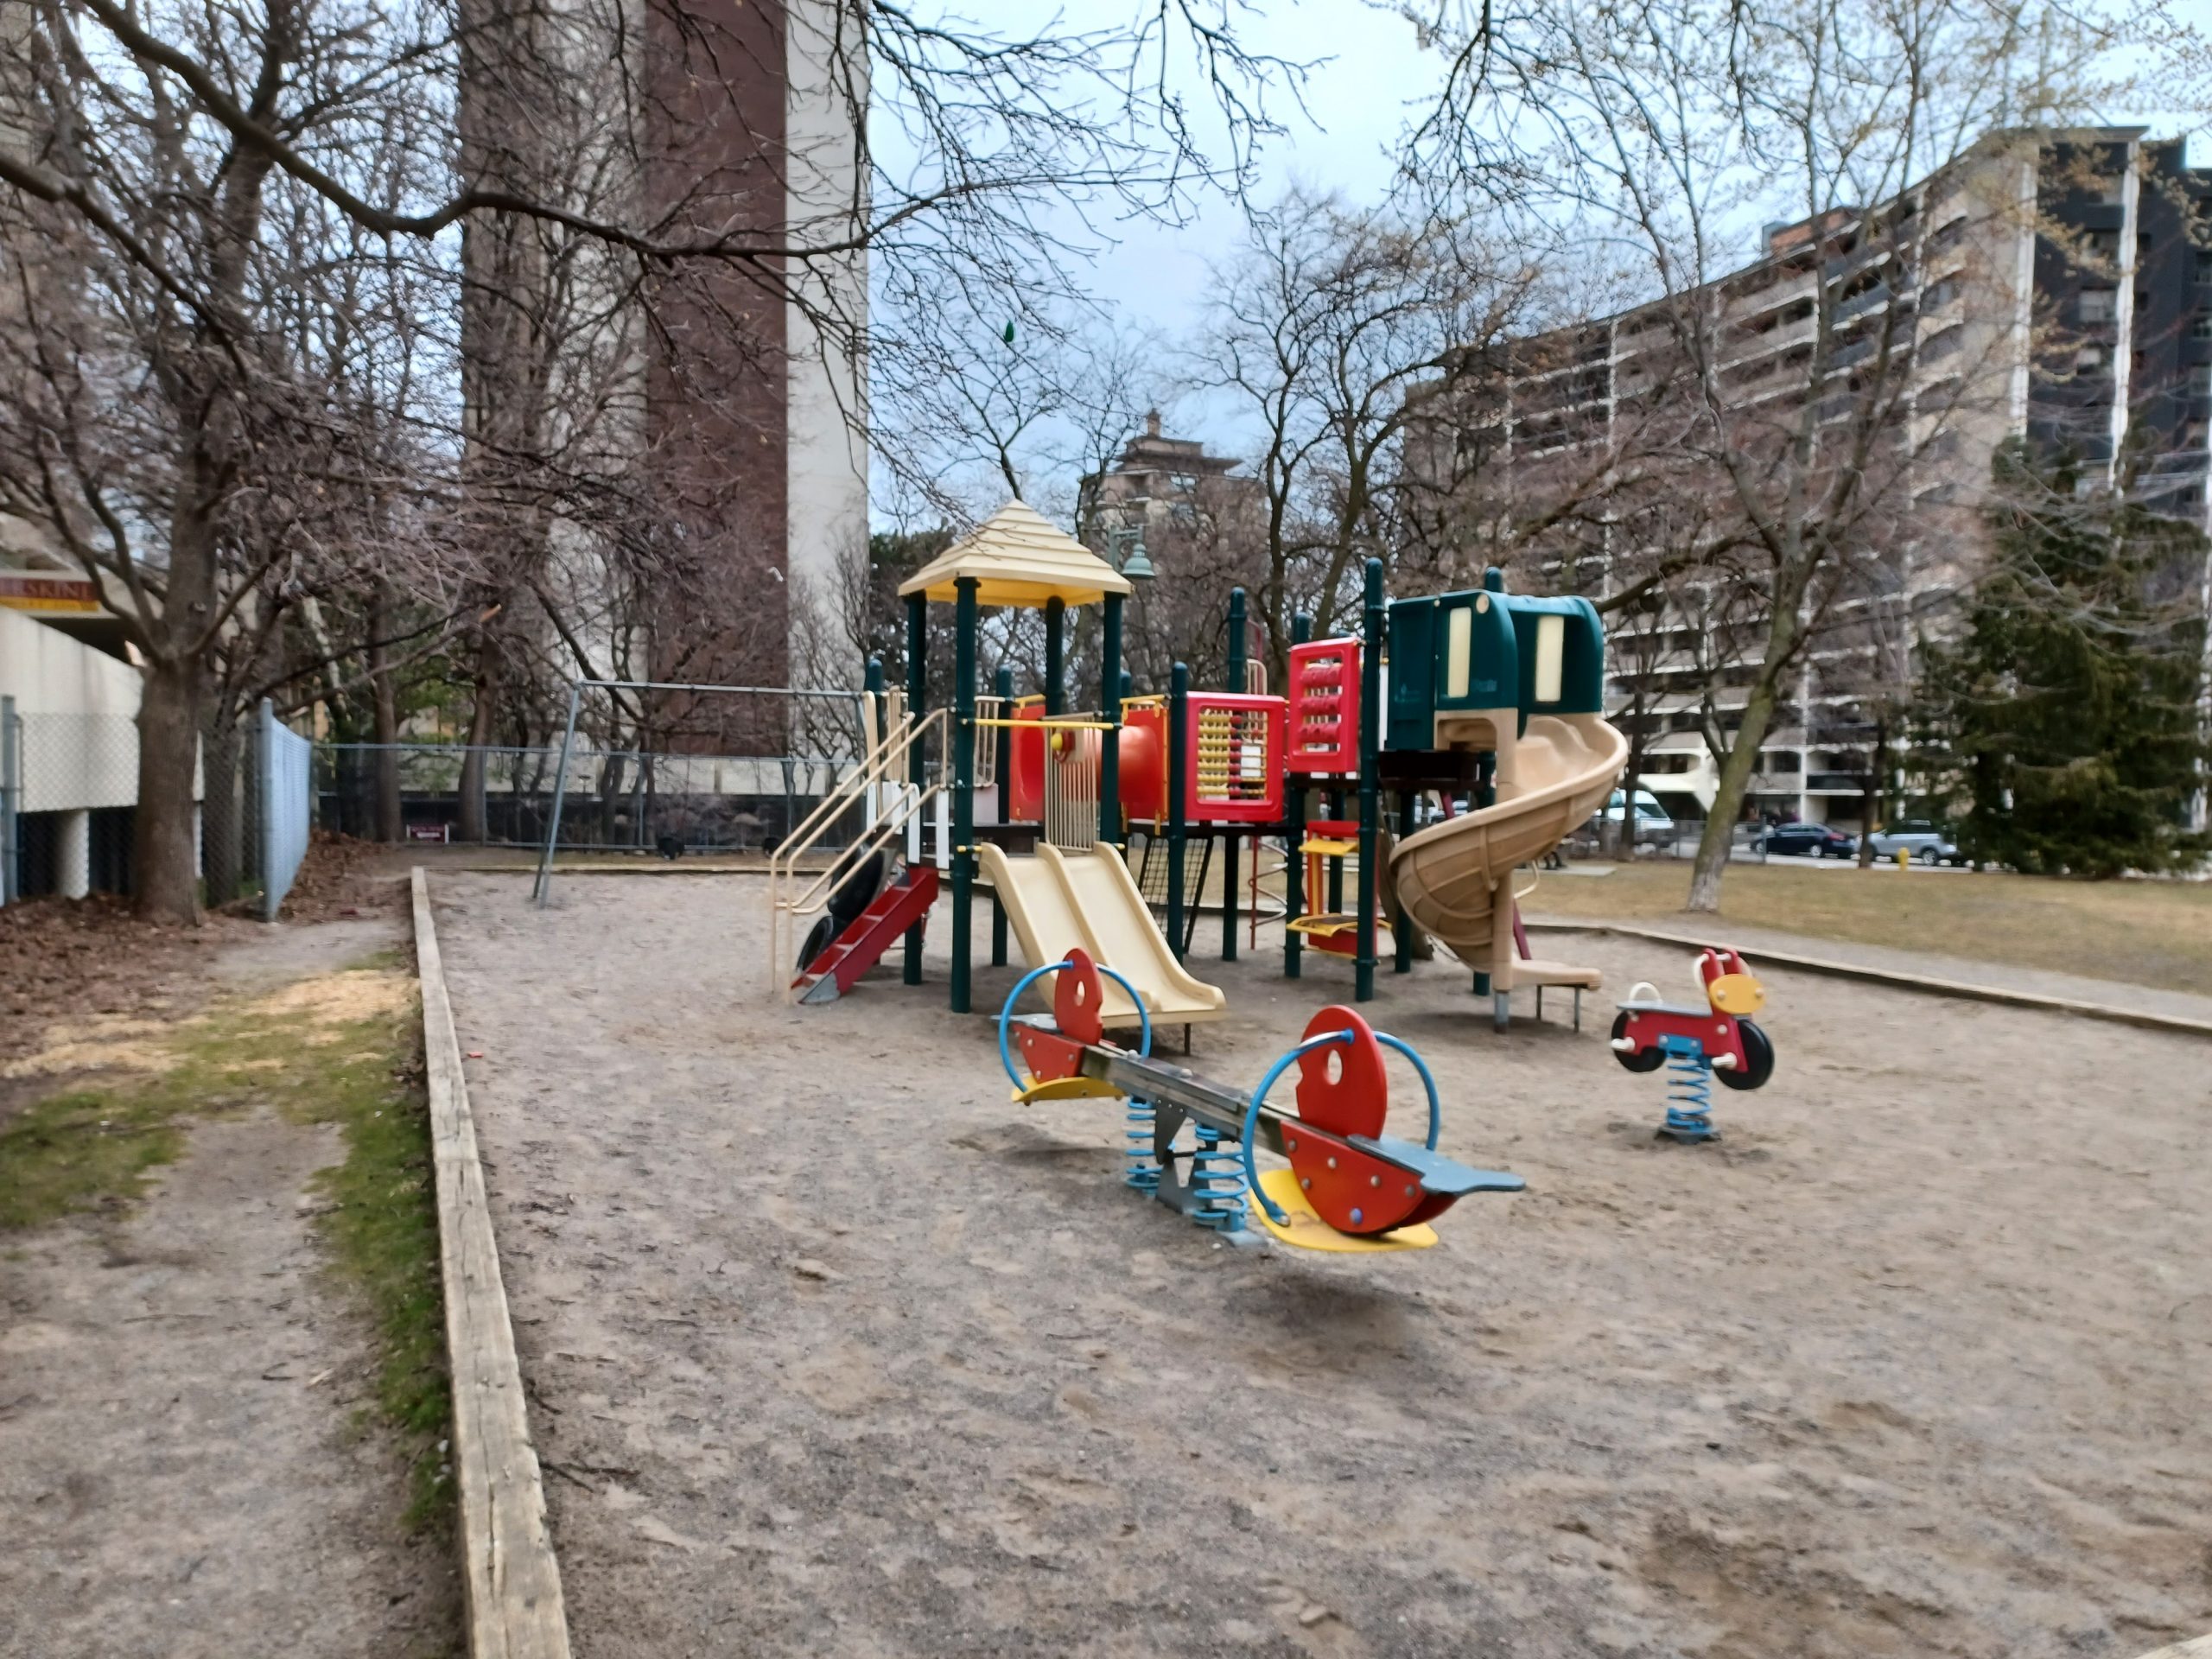 Redpath Avenue Parkette playground, which shows a teeter-totter and spring toy in the foreground and medium-sized play structure and swing set in the background. The playground is on top of sand and includes a short wood border around the entire playground.